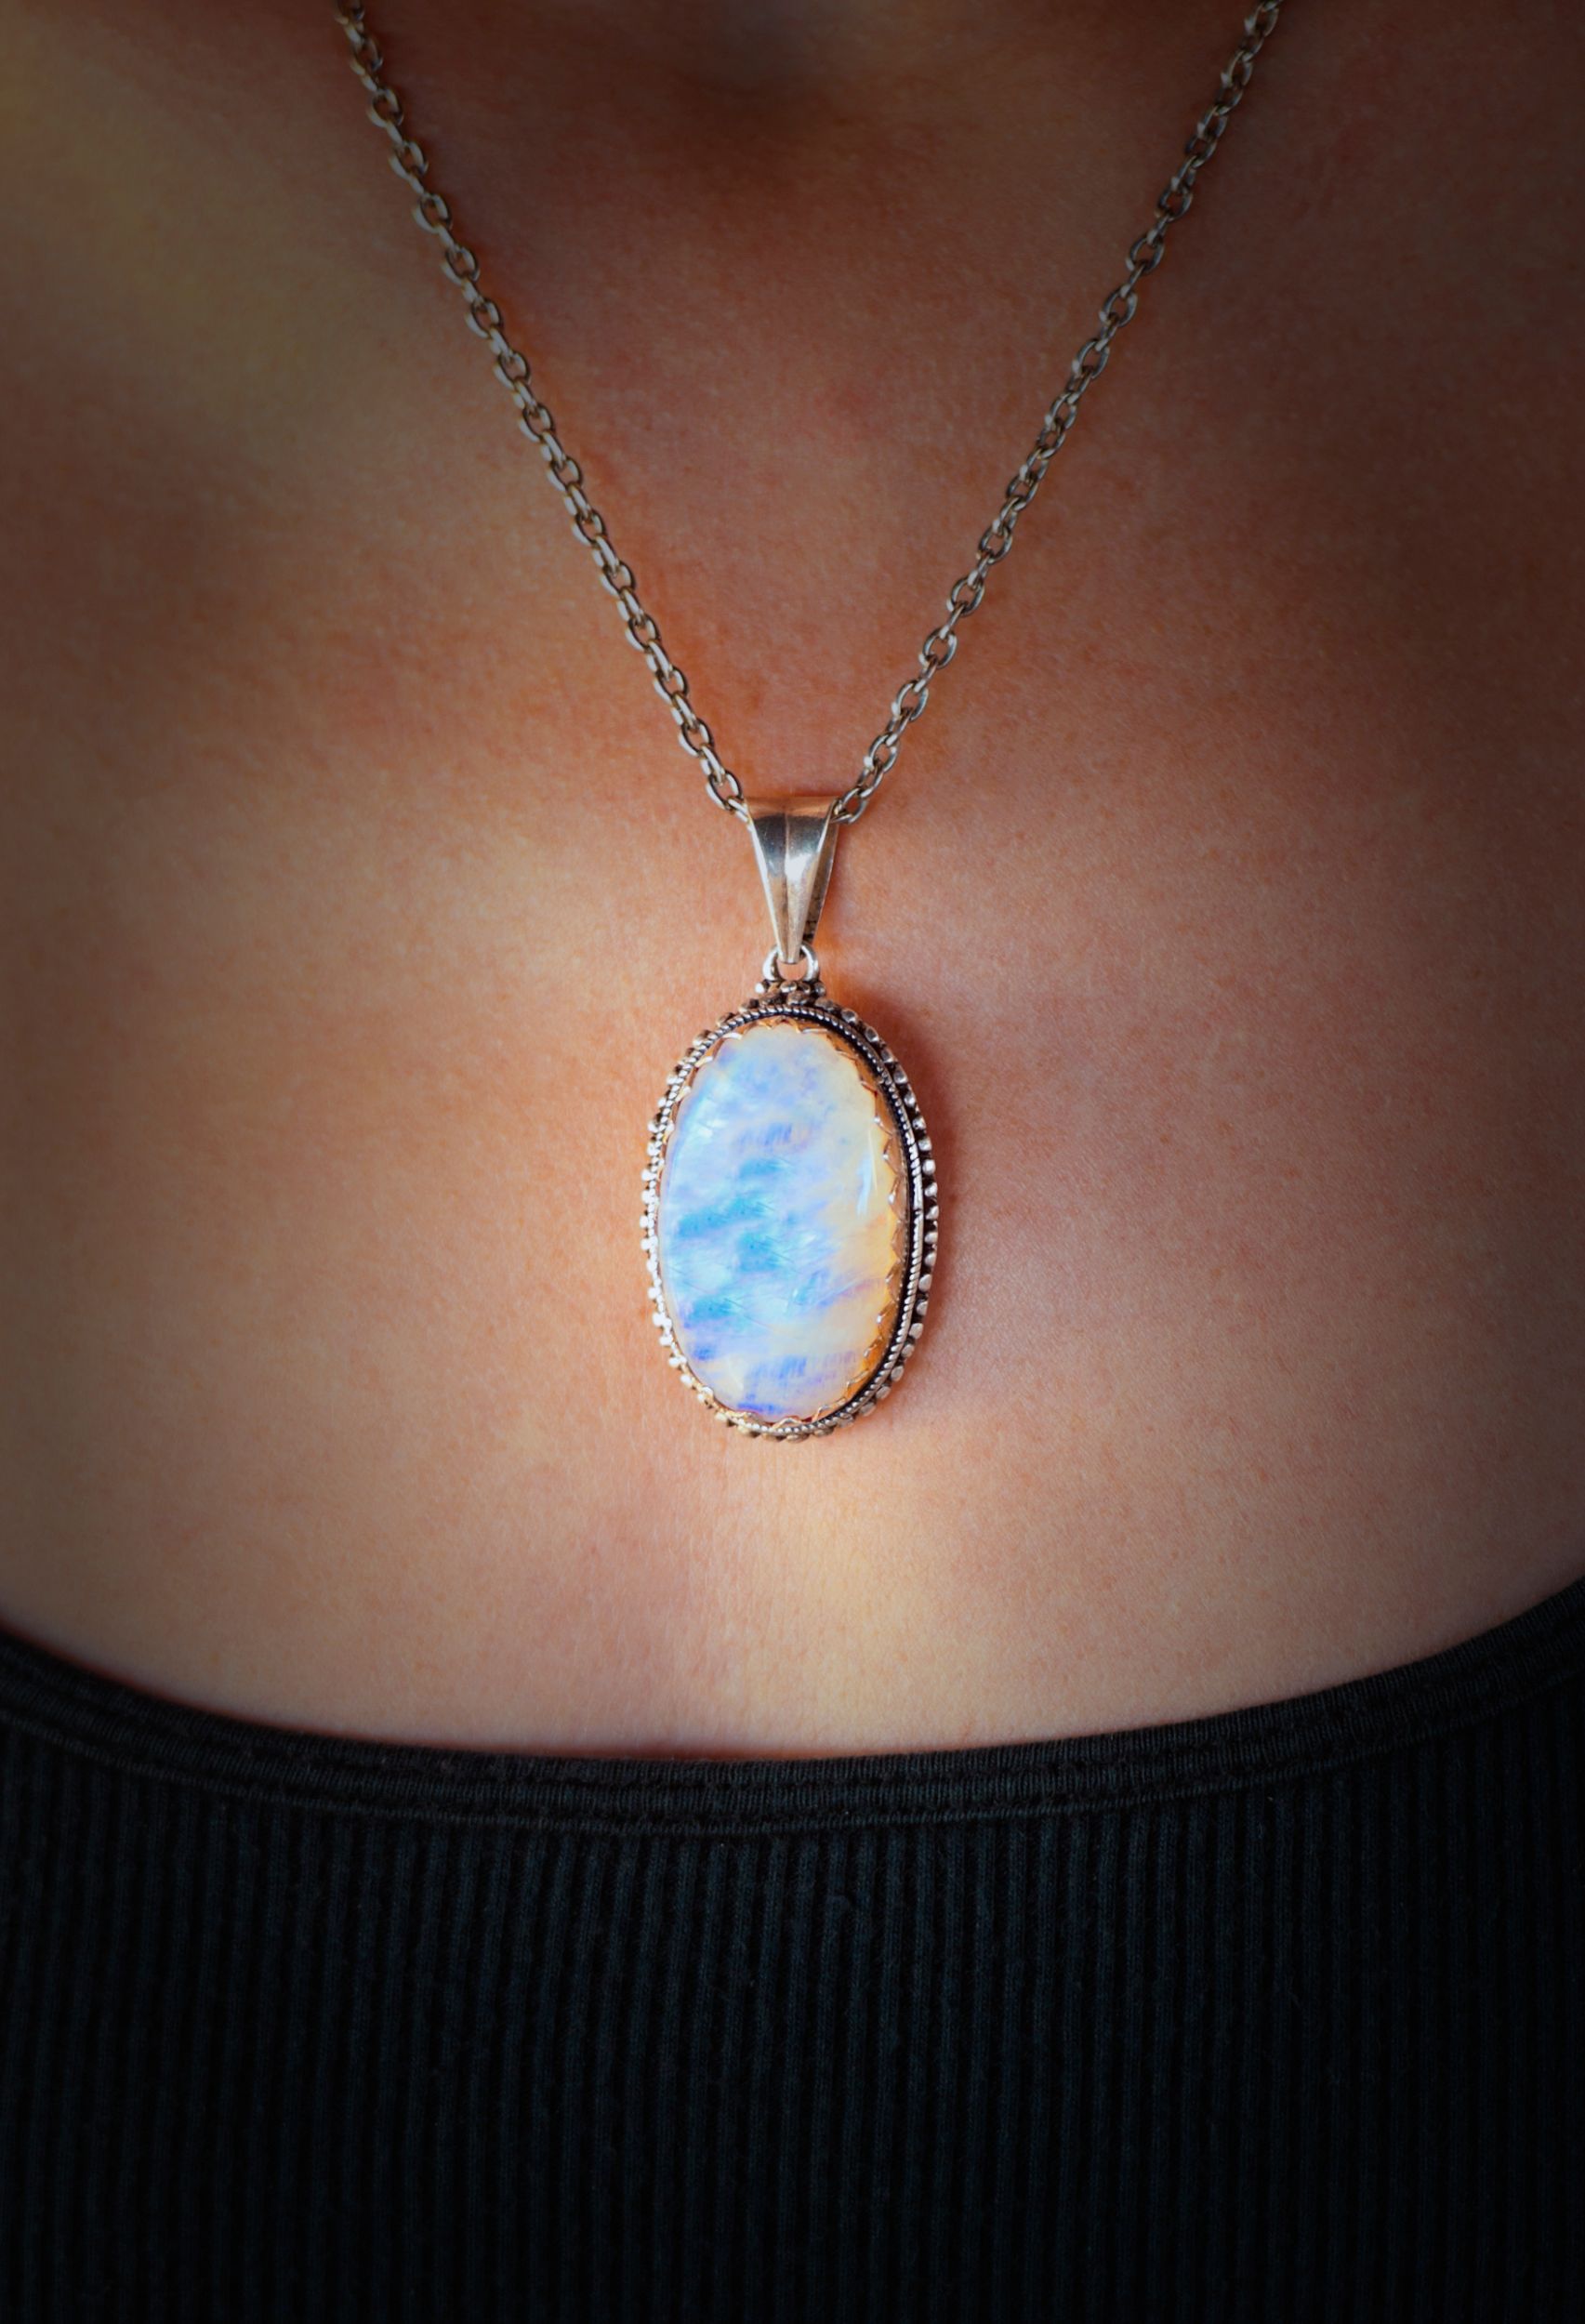 Advantages Of Putting On An Opal